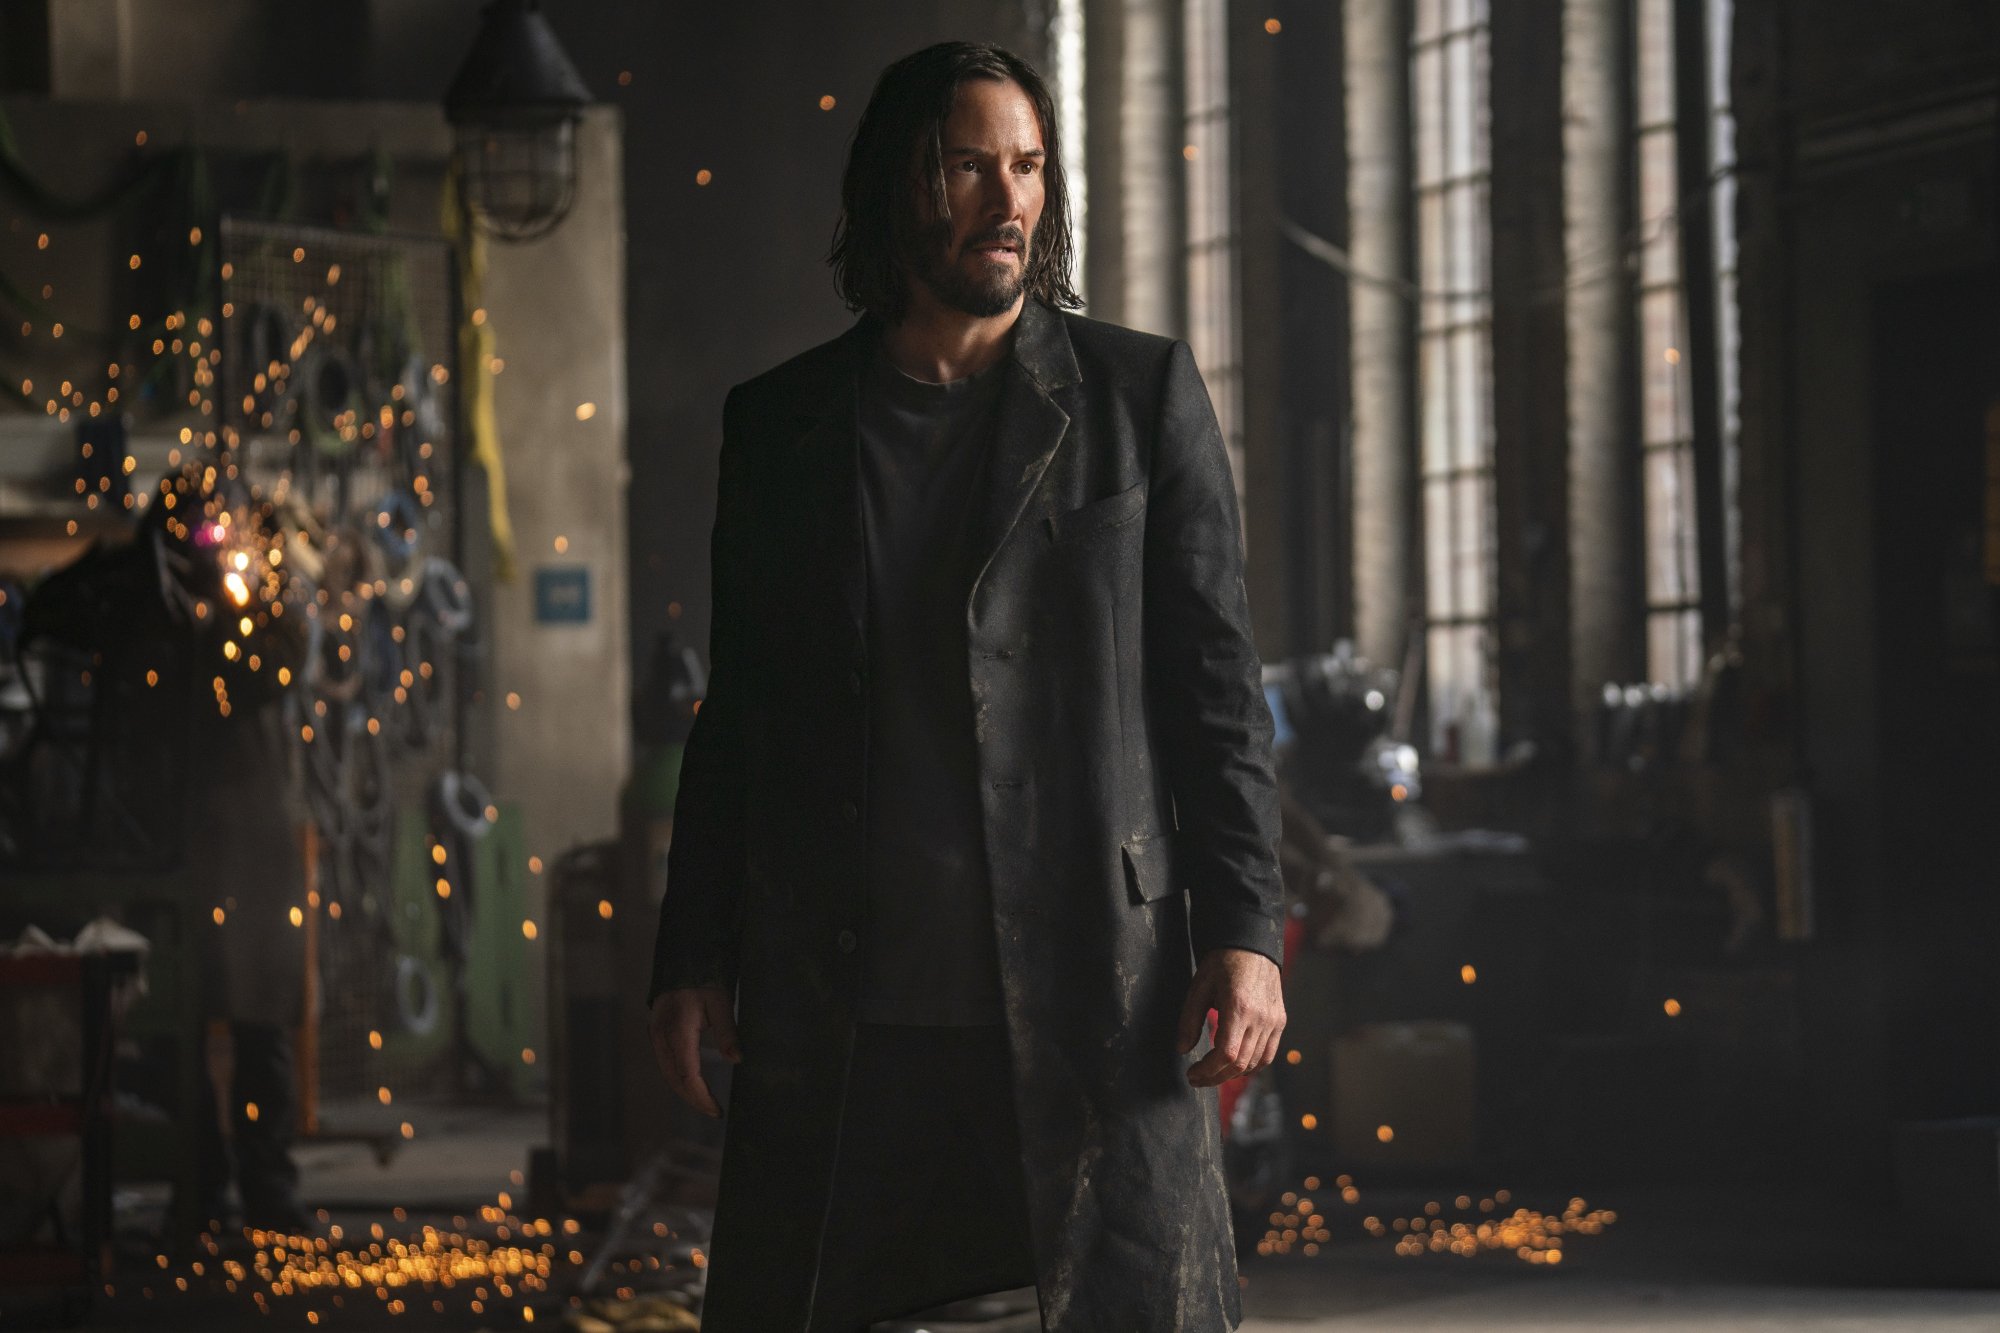 Stunt coordinator Scott Roger's 'The Matrix Resurrections' Keanu Reeves as Neo_Thomas A. Anderson standing wearing a trench coat with sparks flying in the background